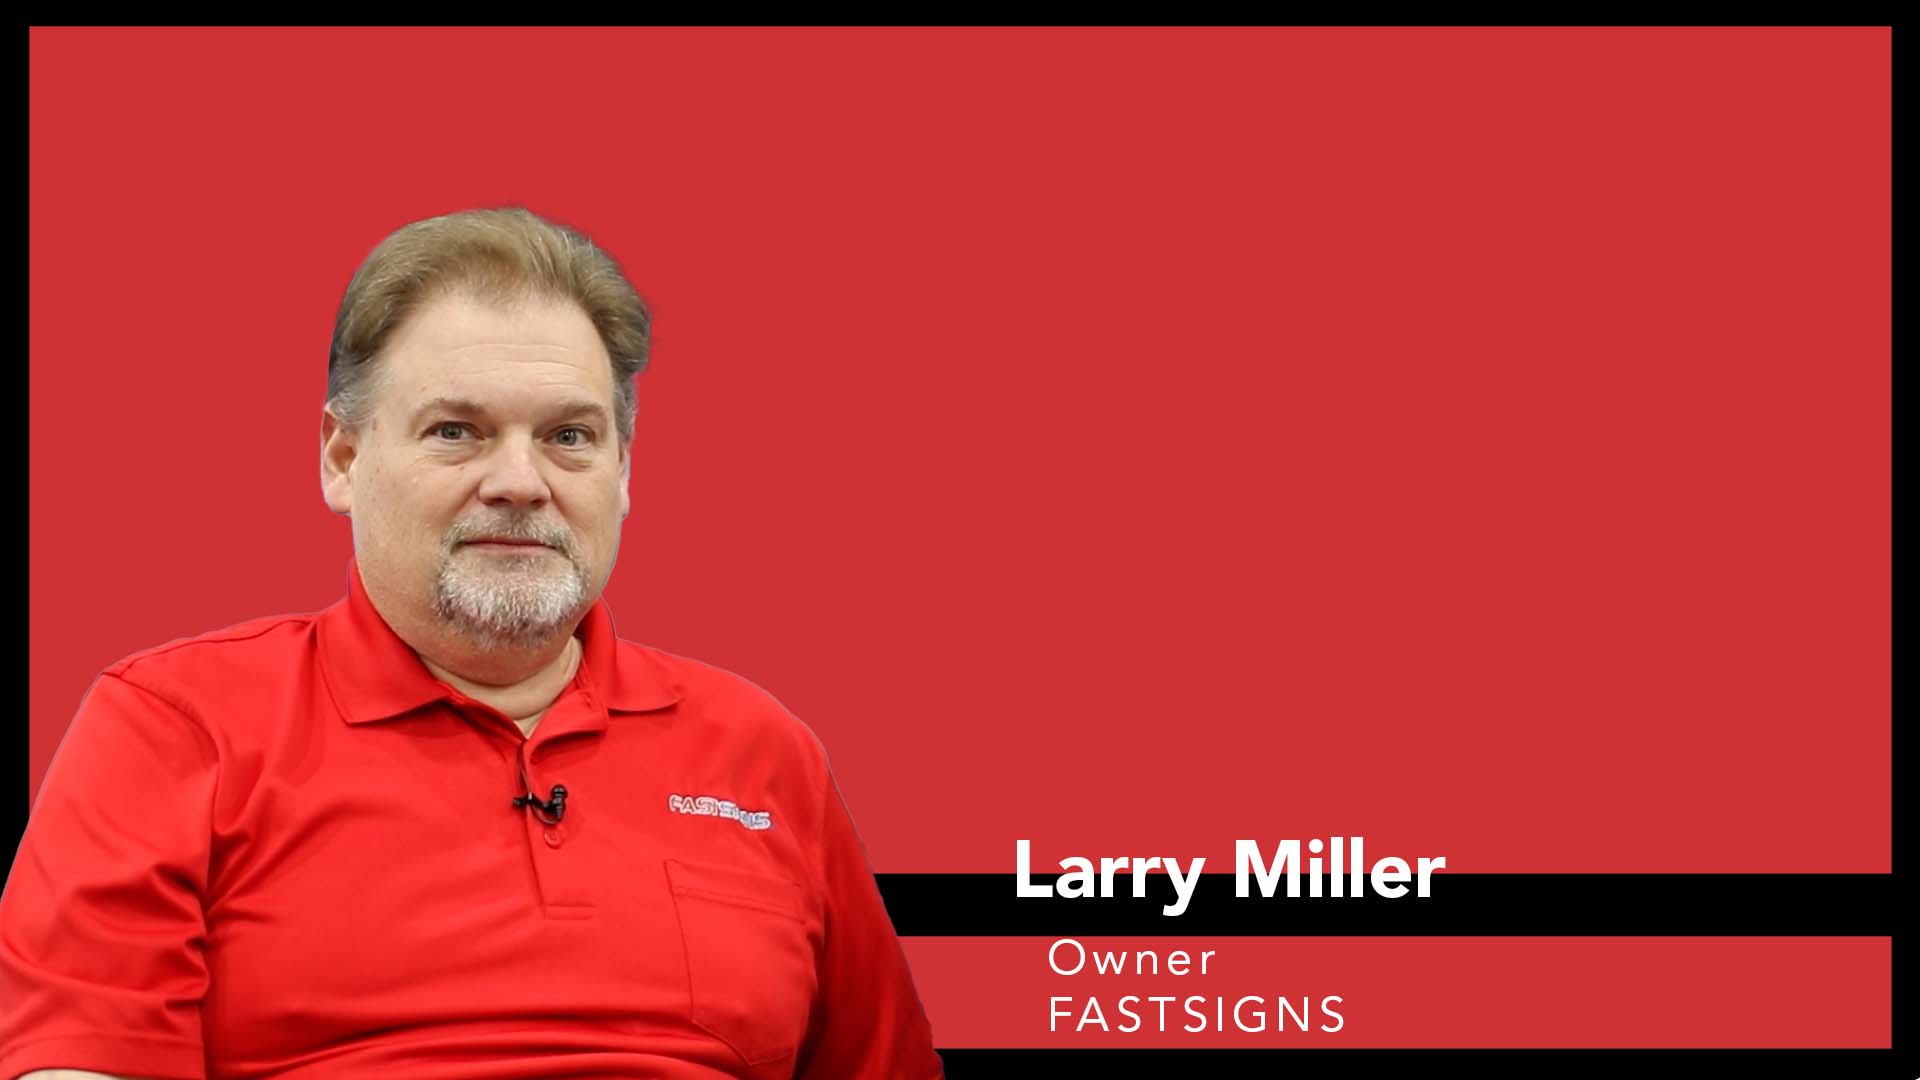 Catching Up with Dayton Ohio FASTSIGNS Franchisee Larry Miller